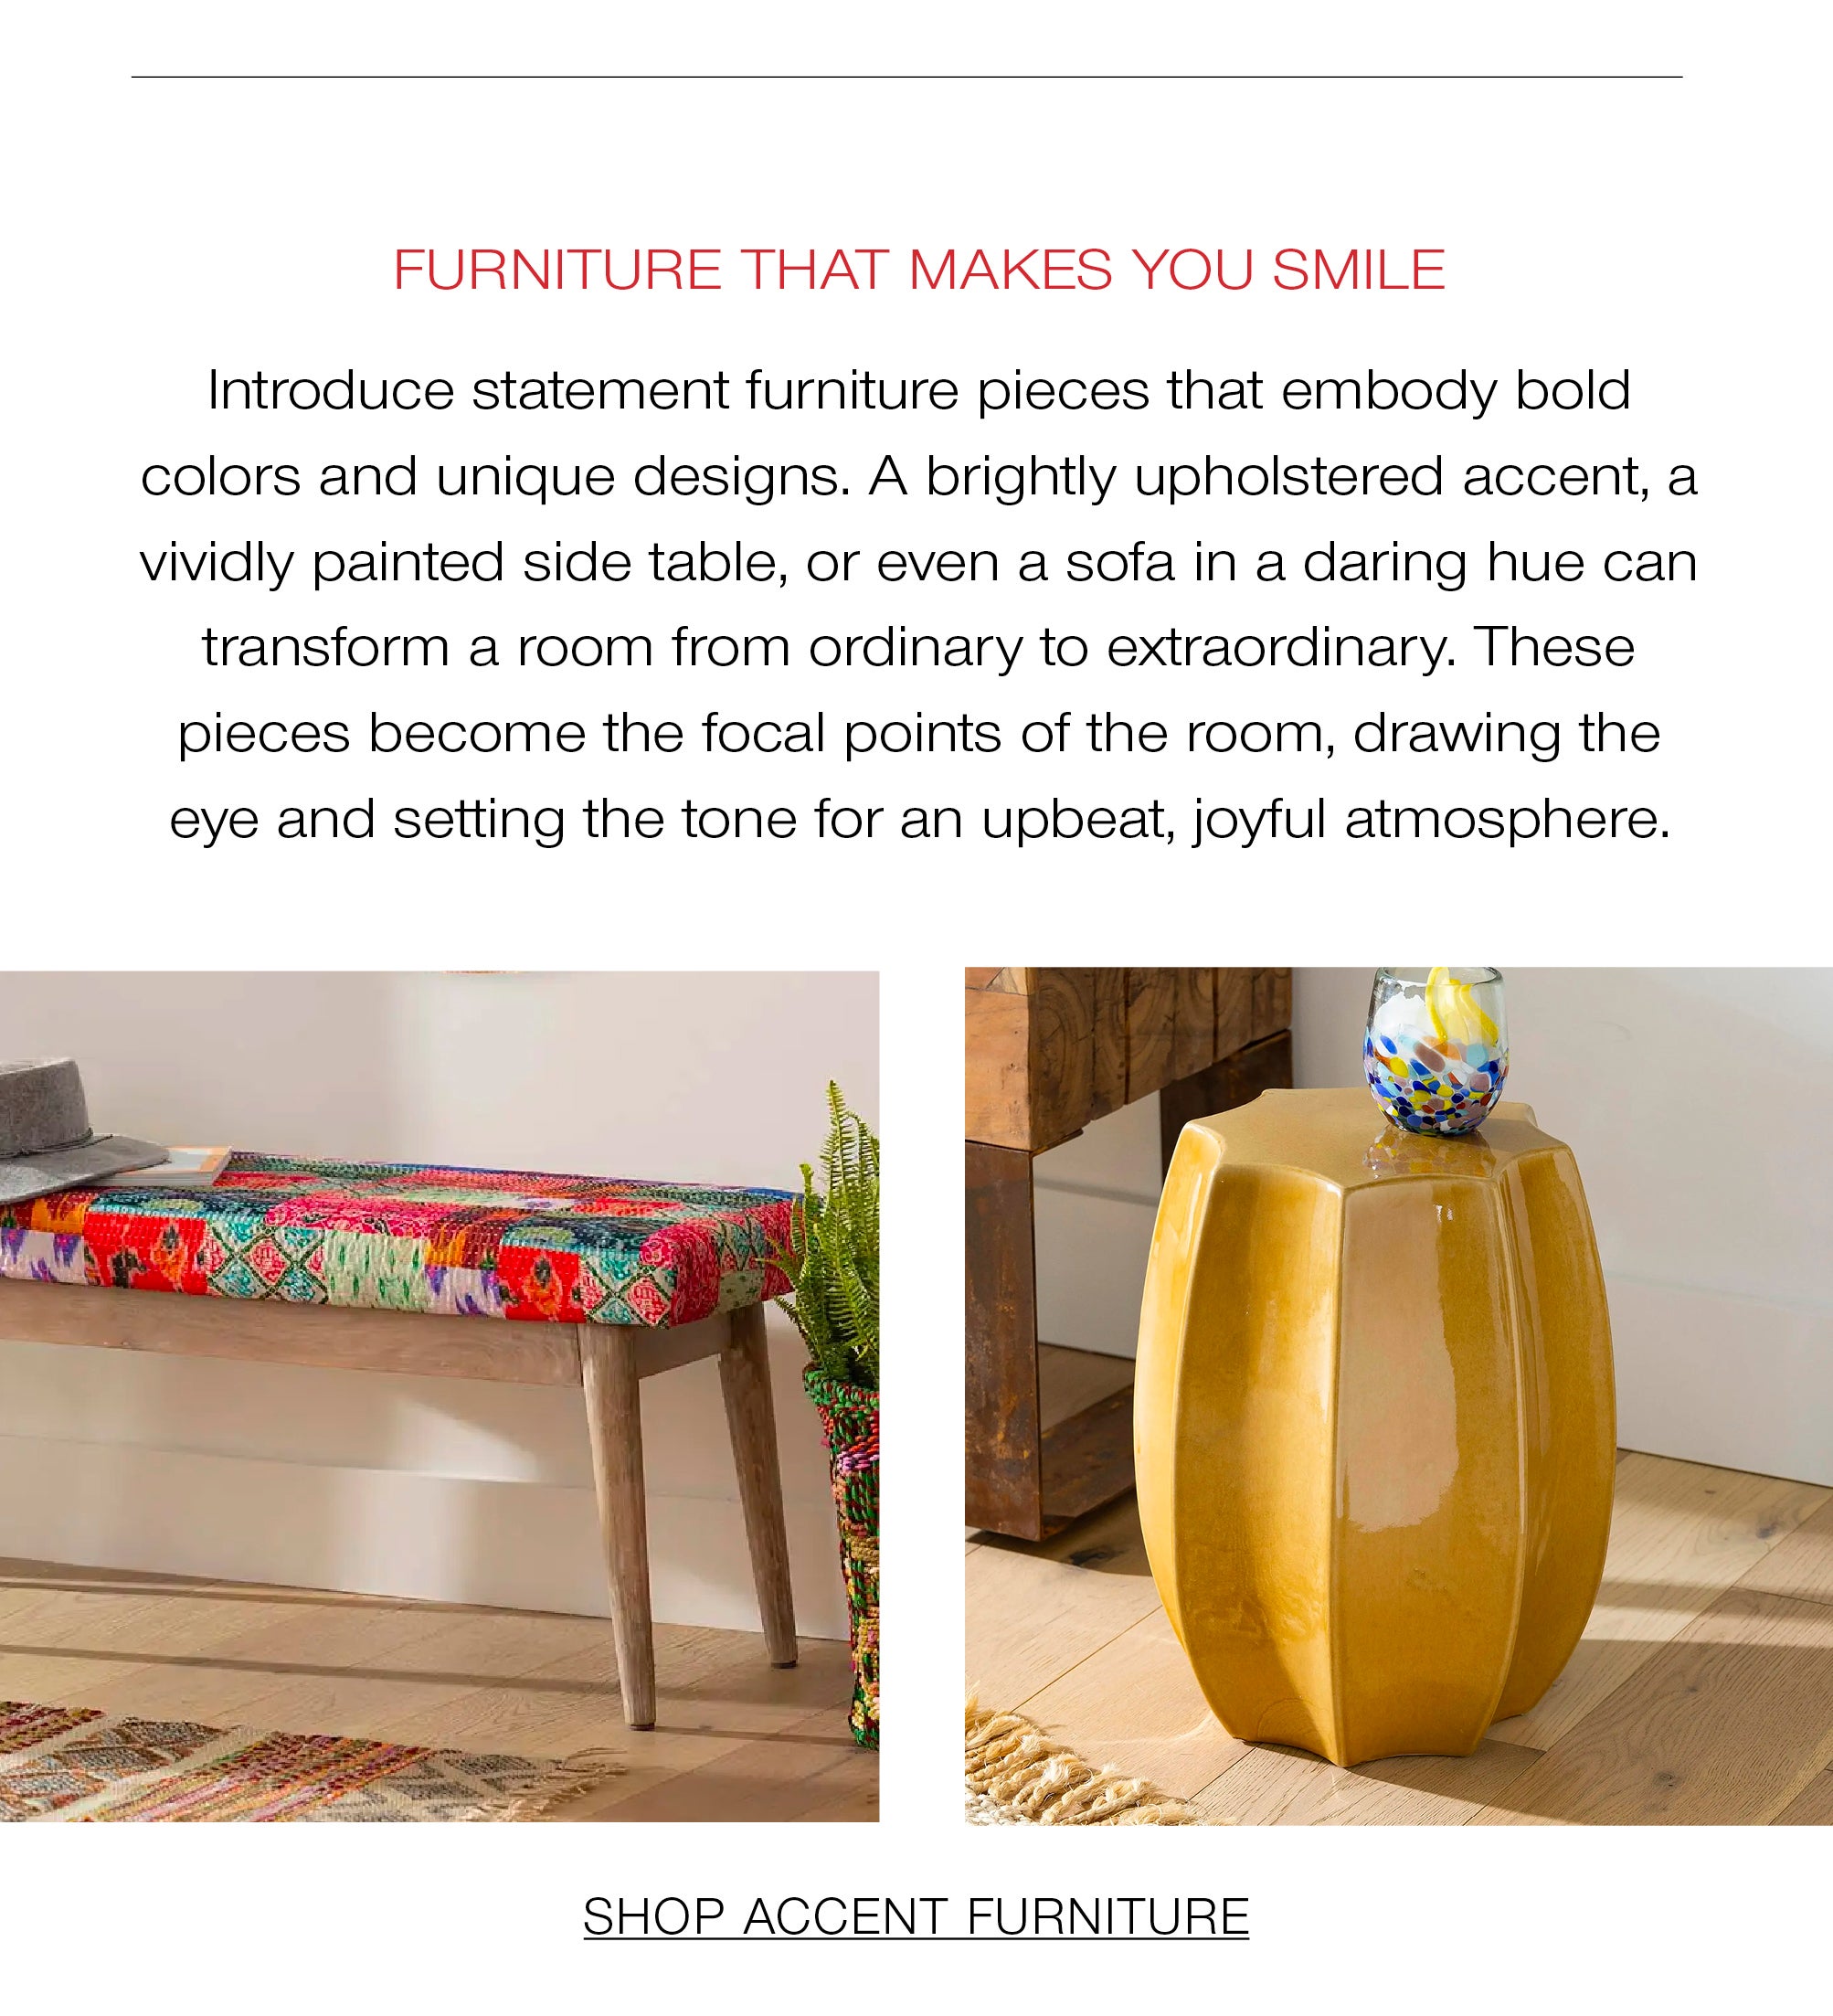 Furniture that Makes You Smile<br />Introduce statement furniture pieces that embody bold colors and unique designs. A brightly upholstered accent, a vividly painted side table, or even a sofa in a daring hue can transform a room from ordinary to extraordinary. These pieces become the focal points of the room, drawing the eye and setting the tone for an upbeat, joyful atmosphere.